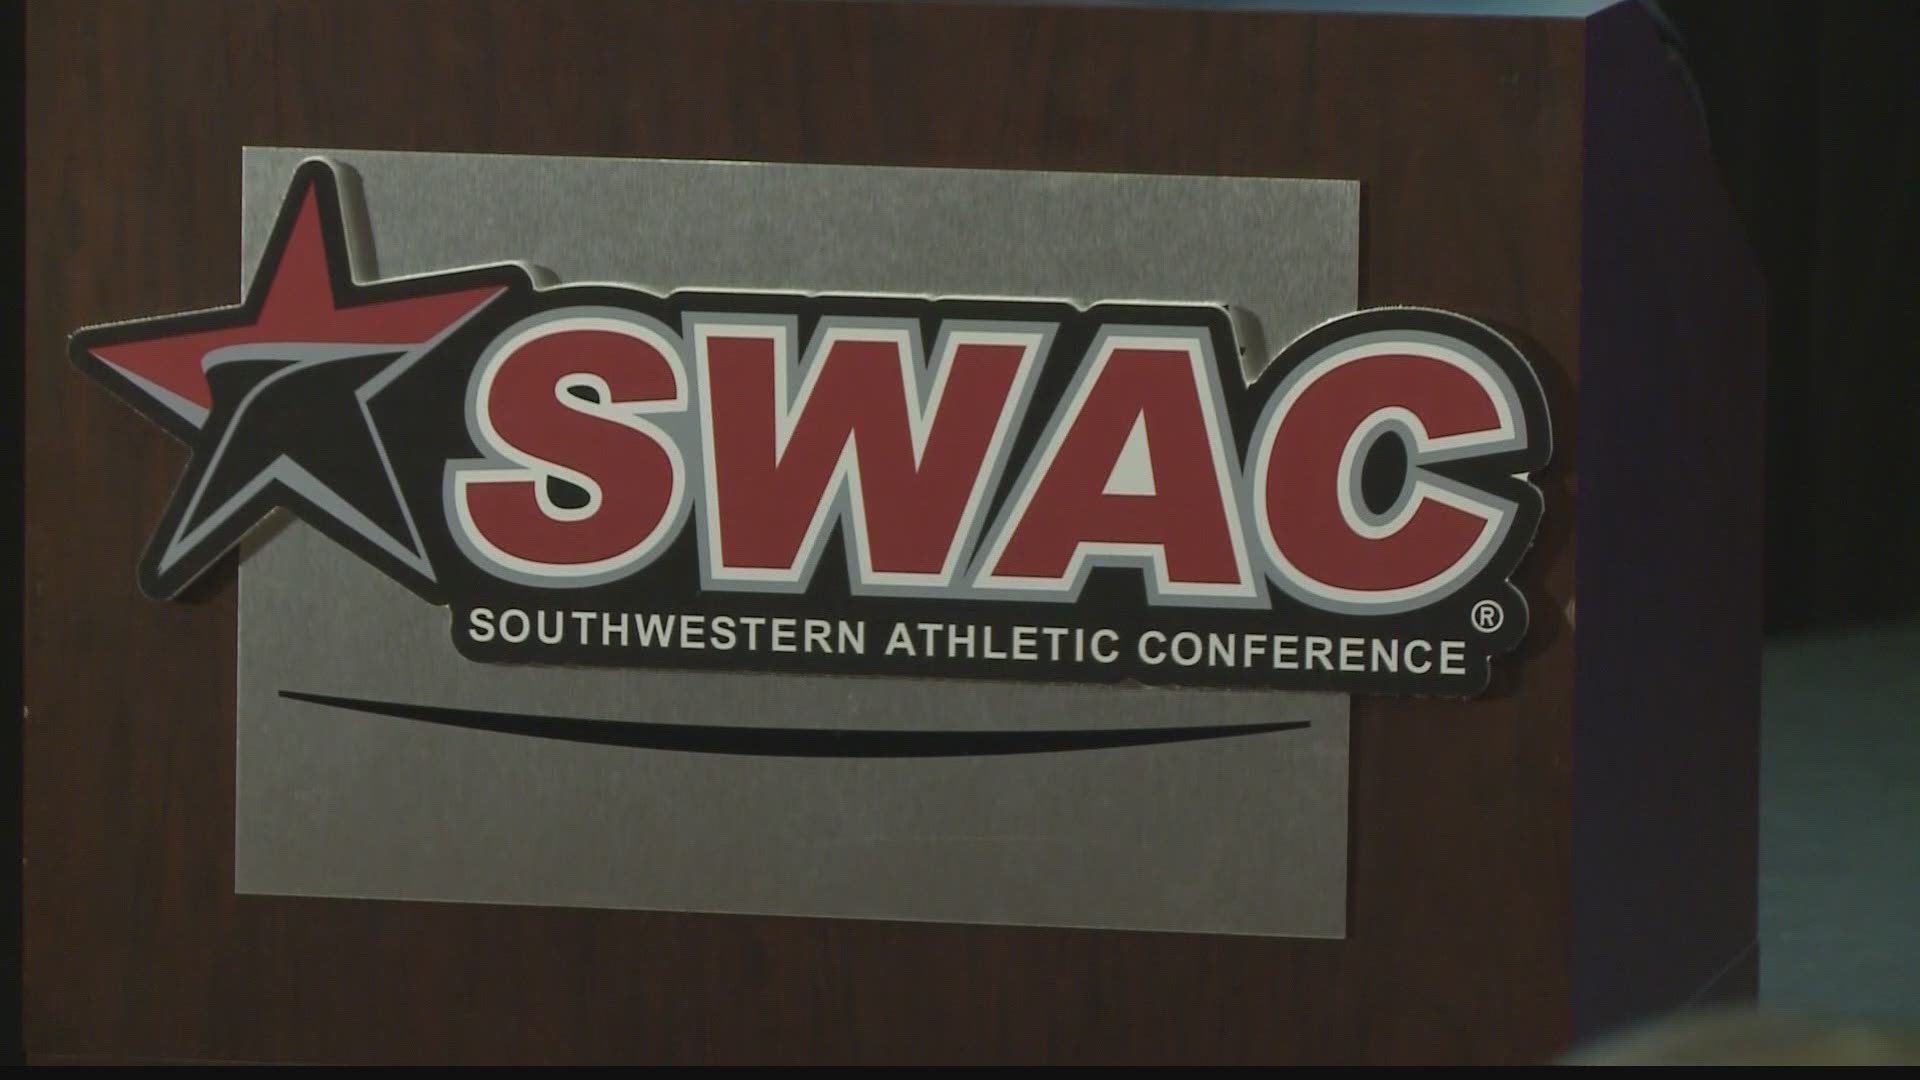 For the first time in history, The SWAC will host its Football Media Days virtually July 22-24